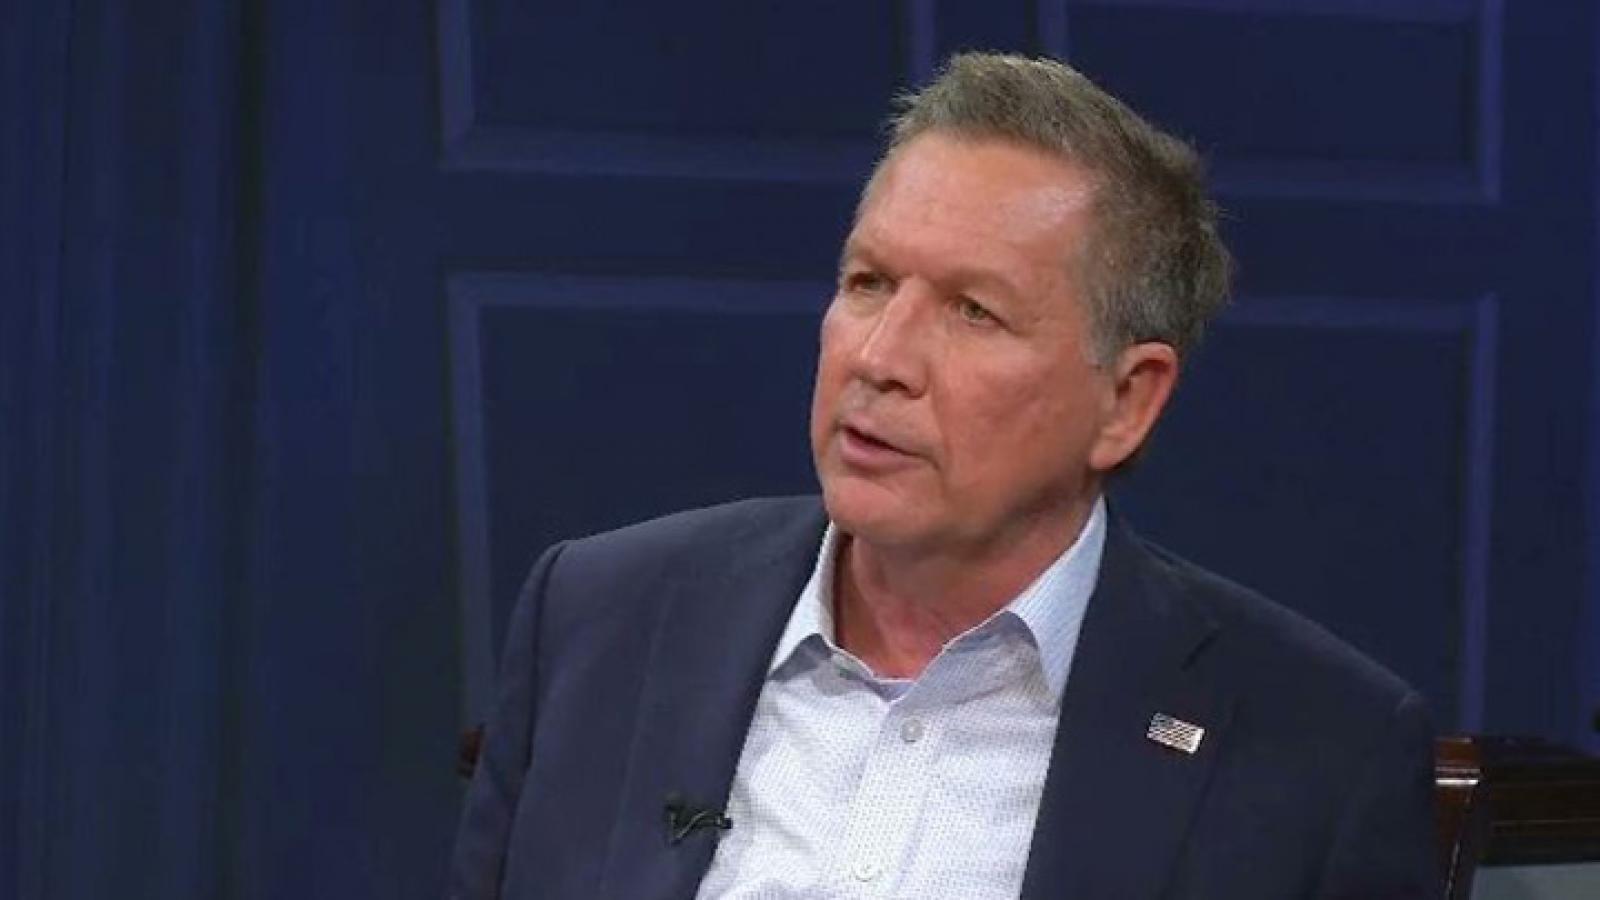 John Kasich, the 69th and current Governor of Ohio, who seeks the Republican nomination for President of the United States in the 2016 election